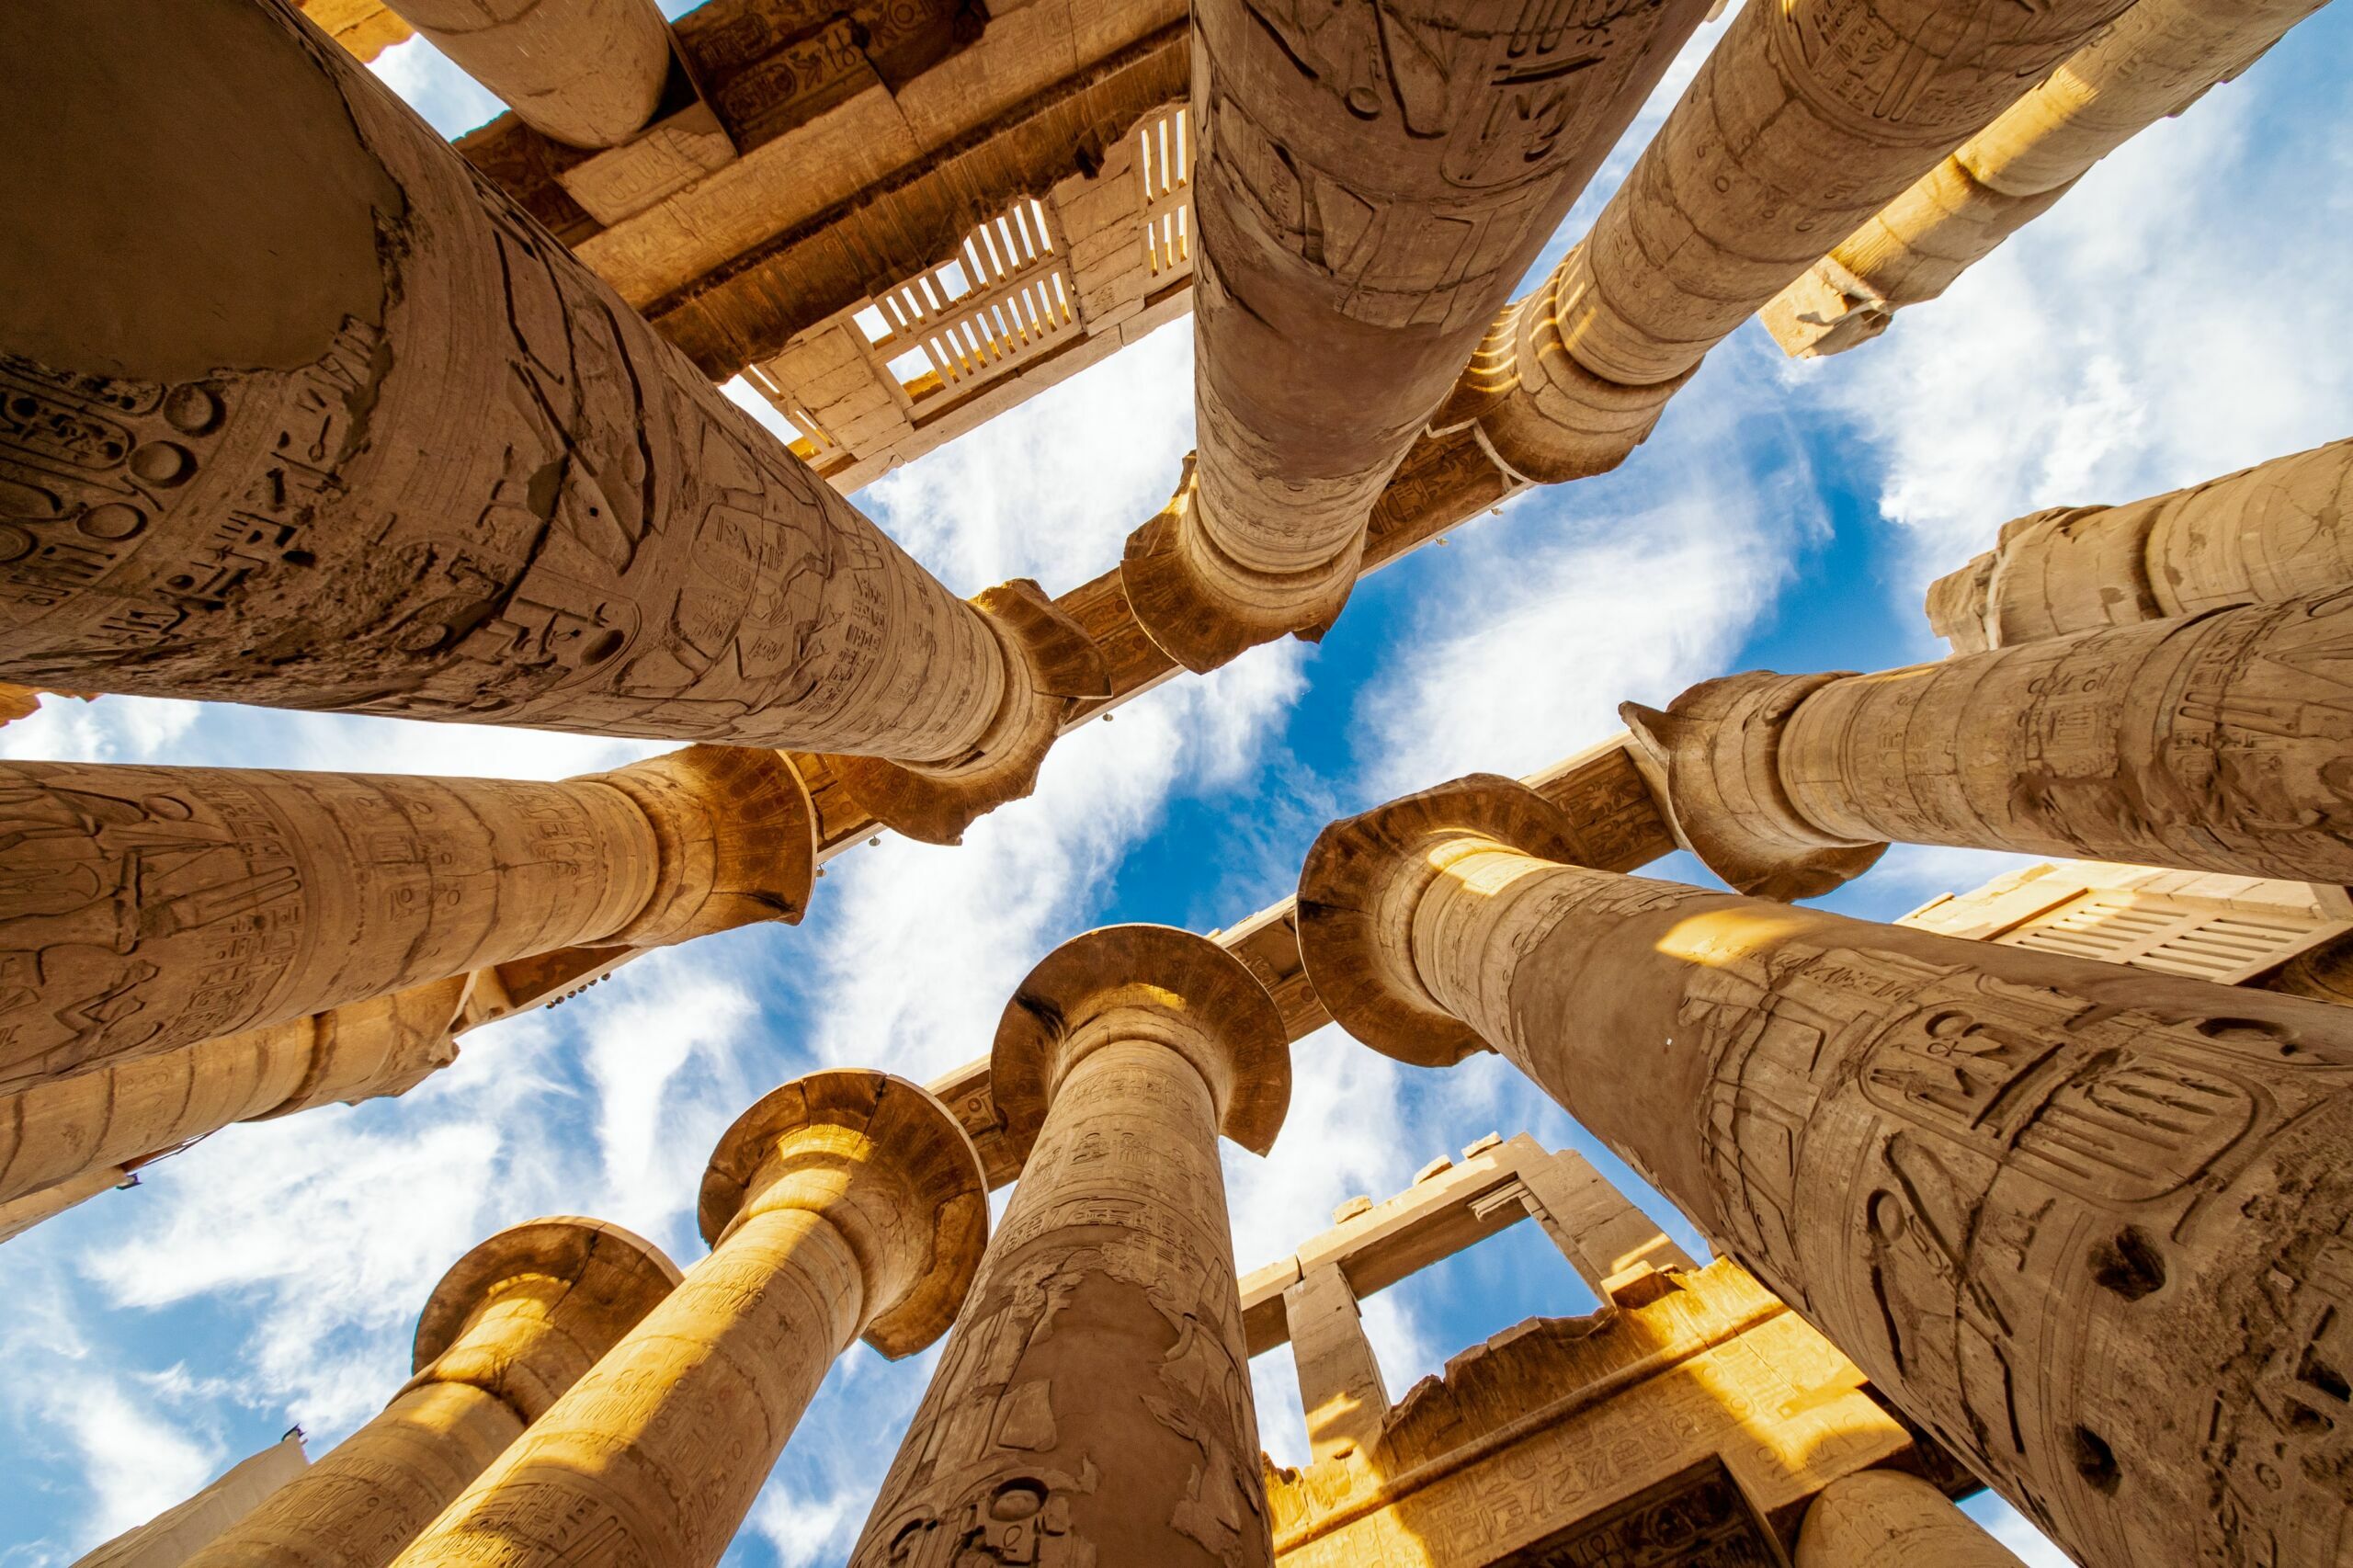 From Hurghada: Luxor Day Tour in a small group